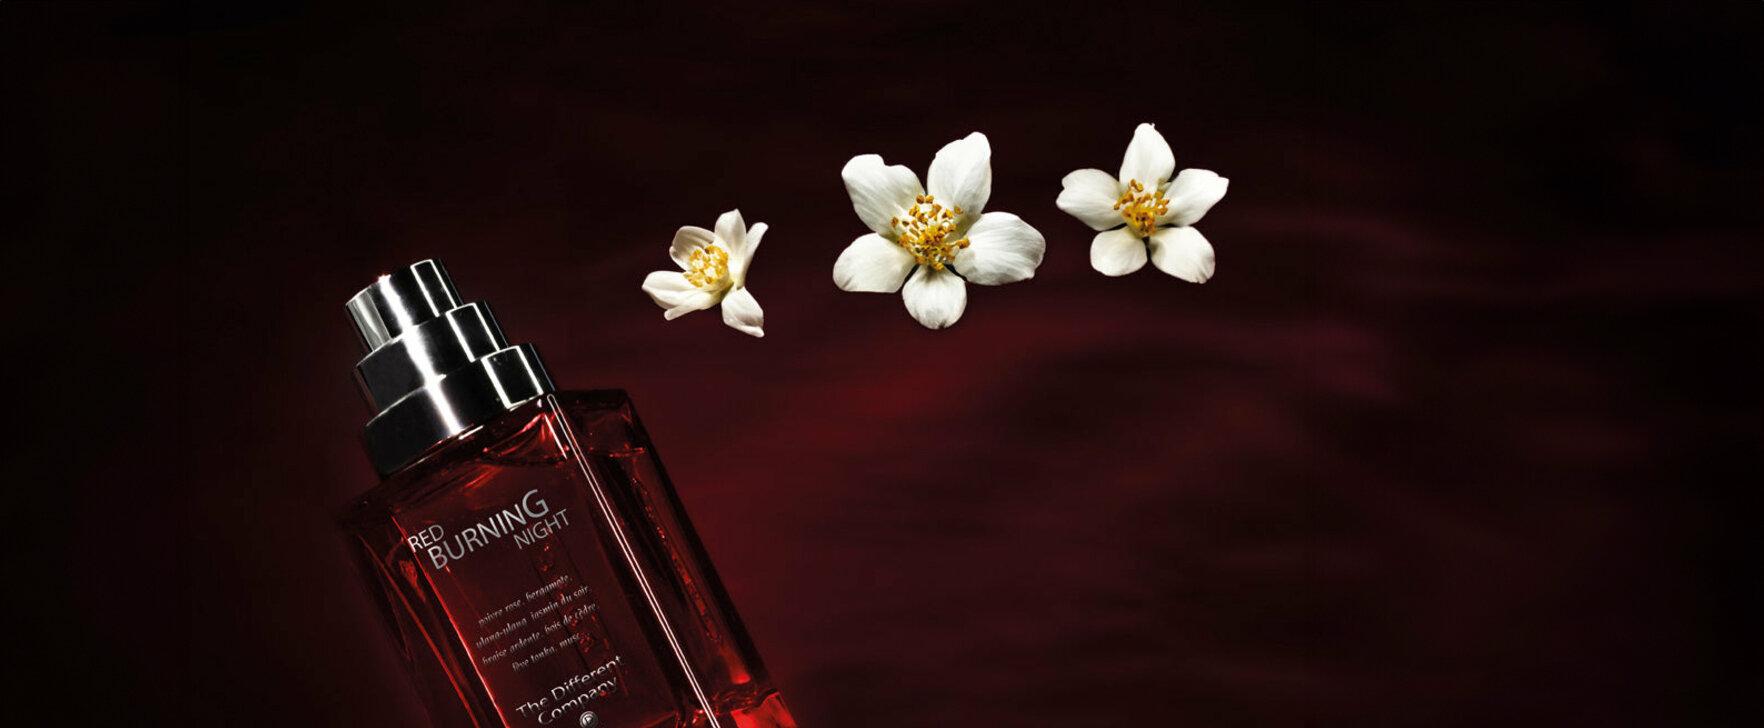 Fiery Temptation: The New Eau de Parfum Red Burning Night by The Different Company